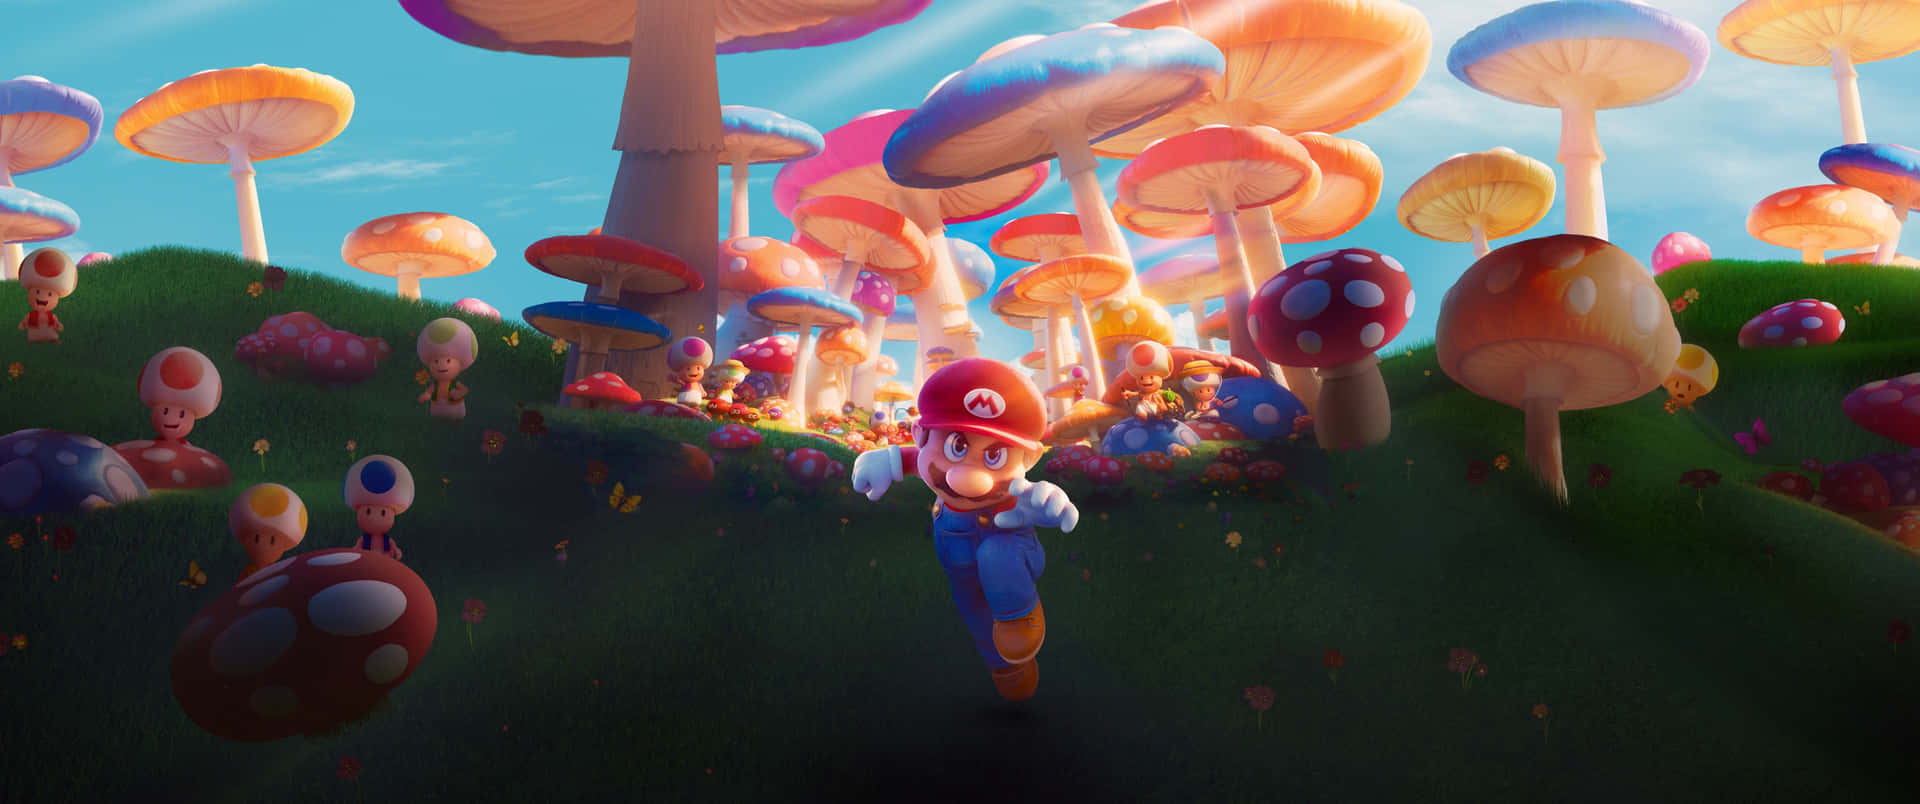 Mario And Mushrooms In A Field Background